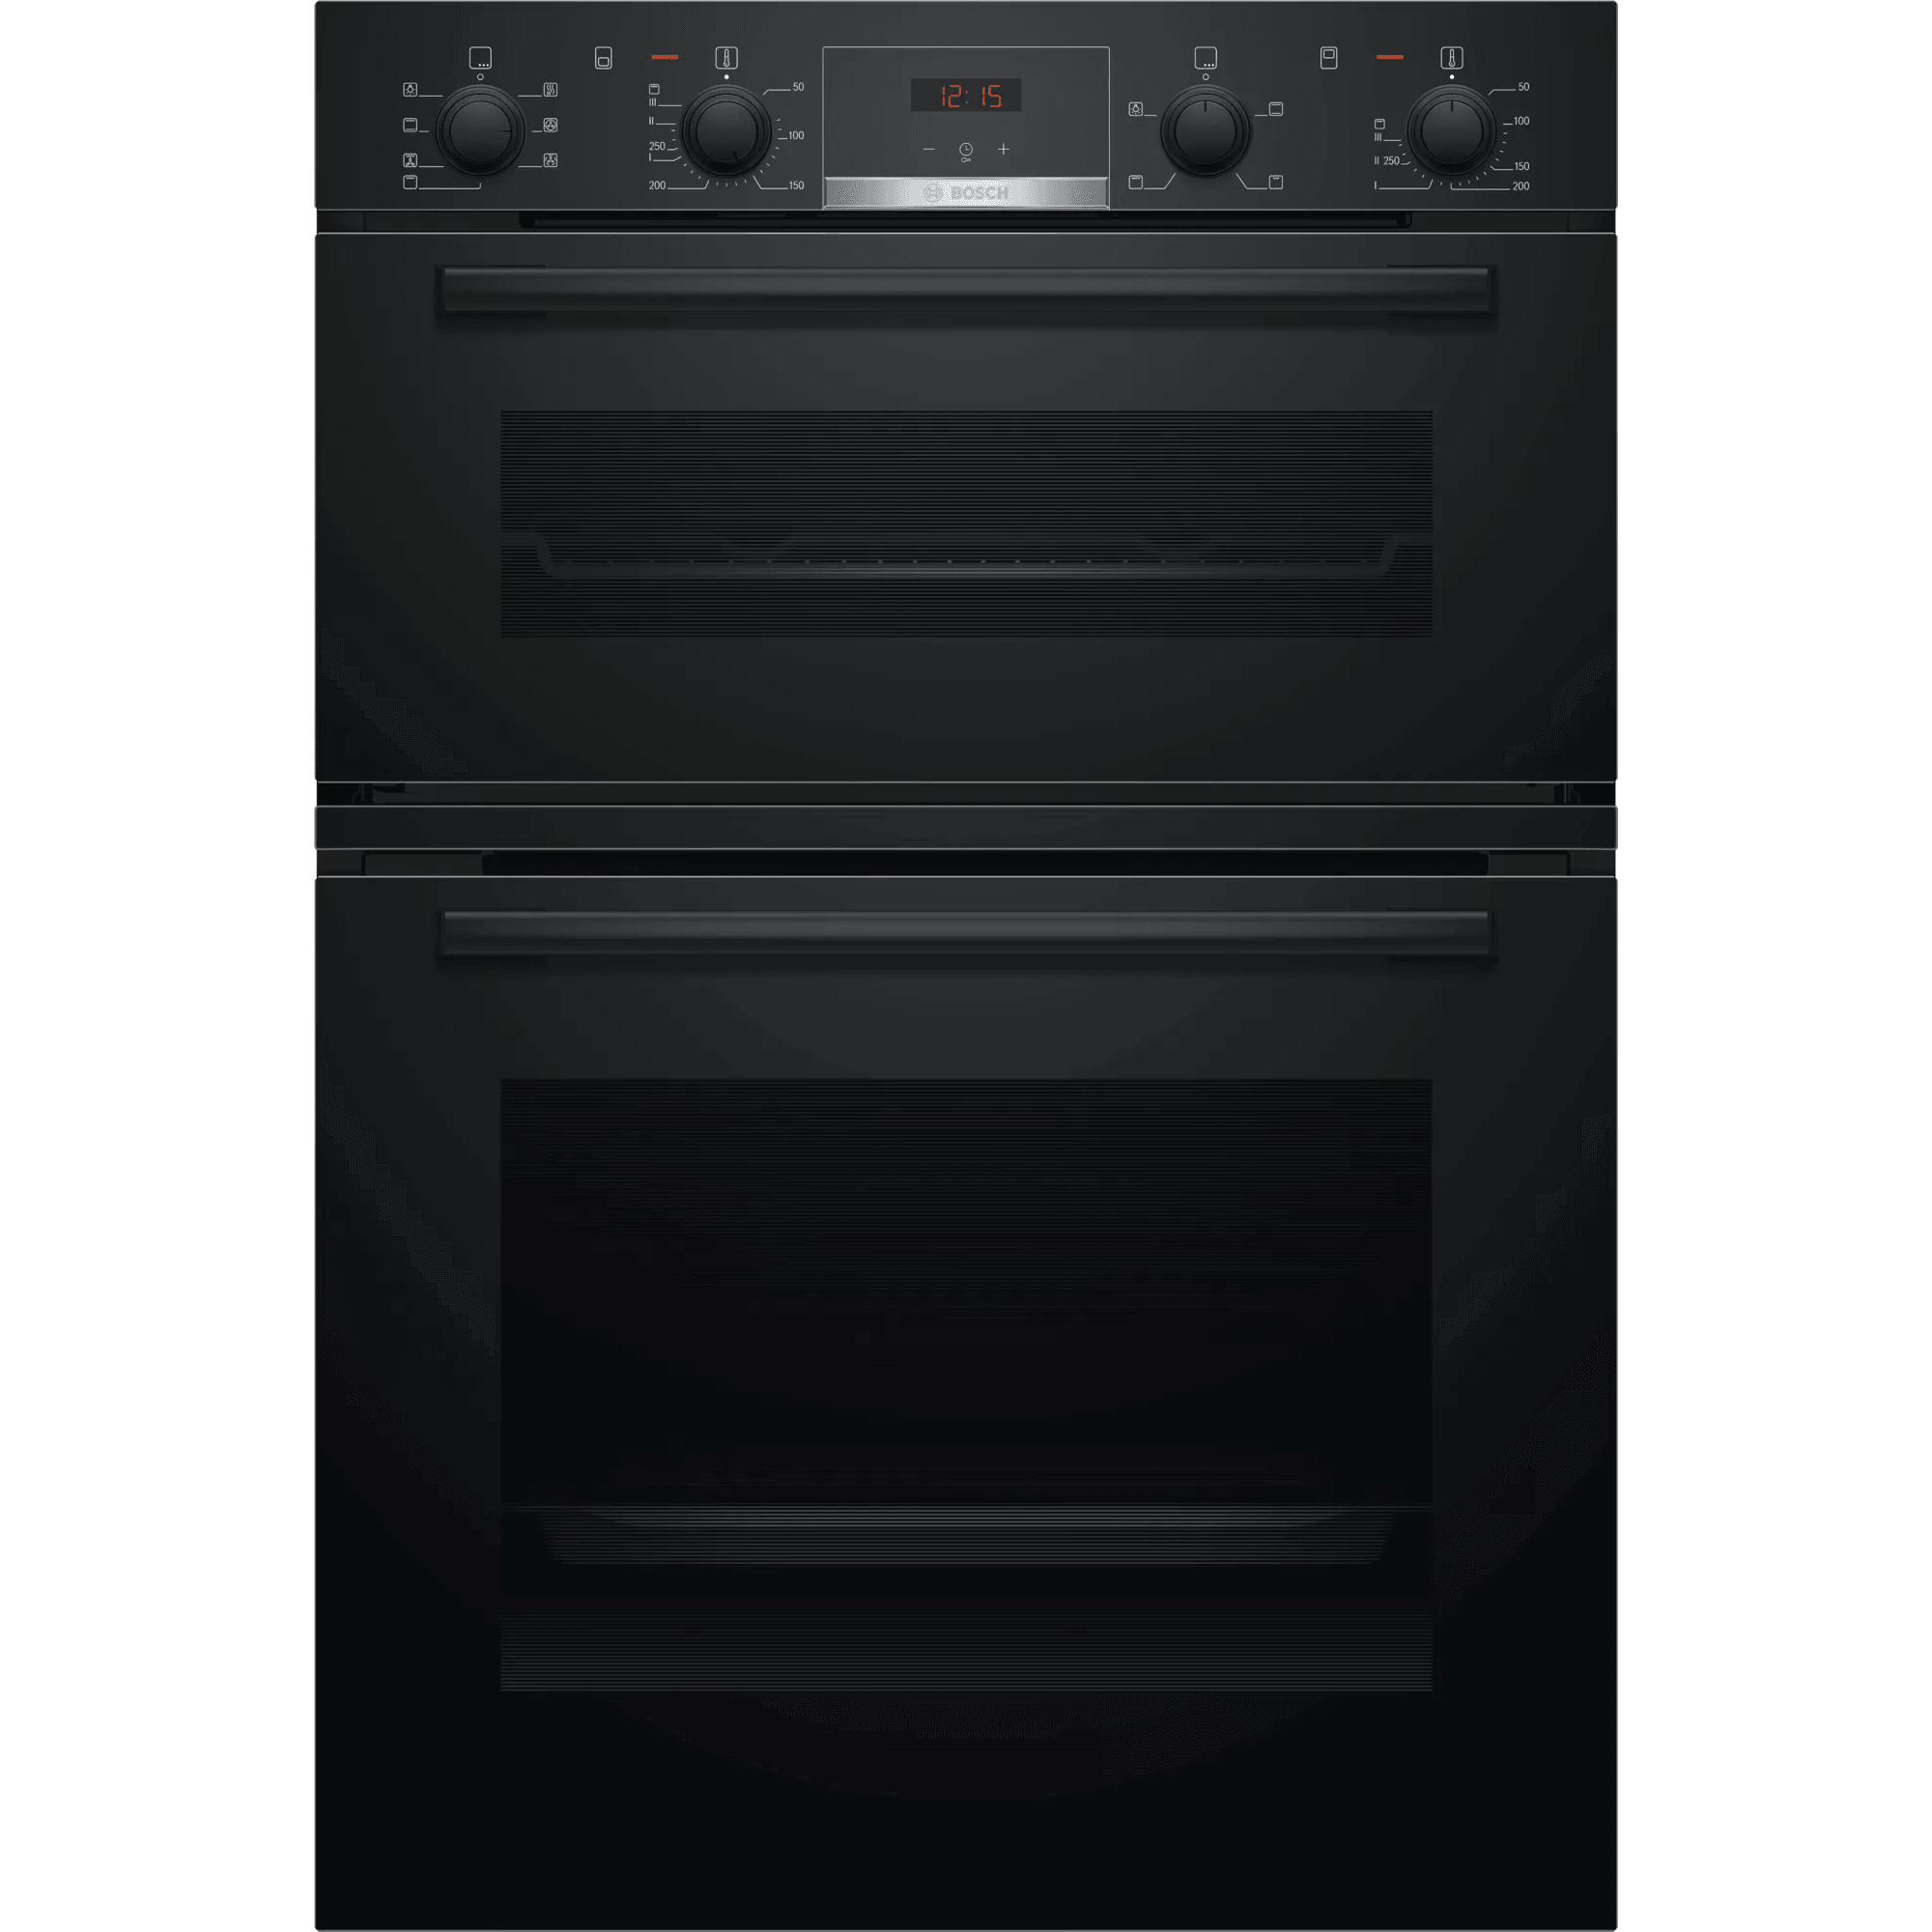 Bosch Serie 4 59.4CM Built-In Electric Double Oven - Black | MBS533BB0B (7494017908924)